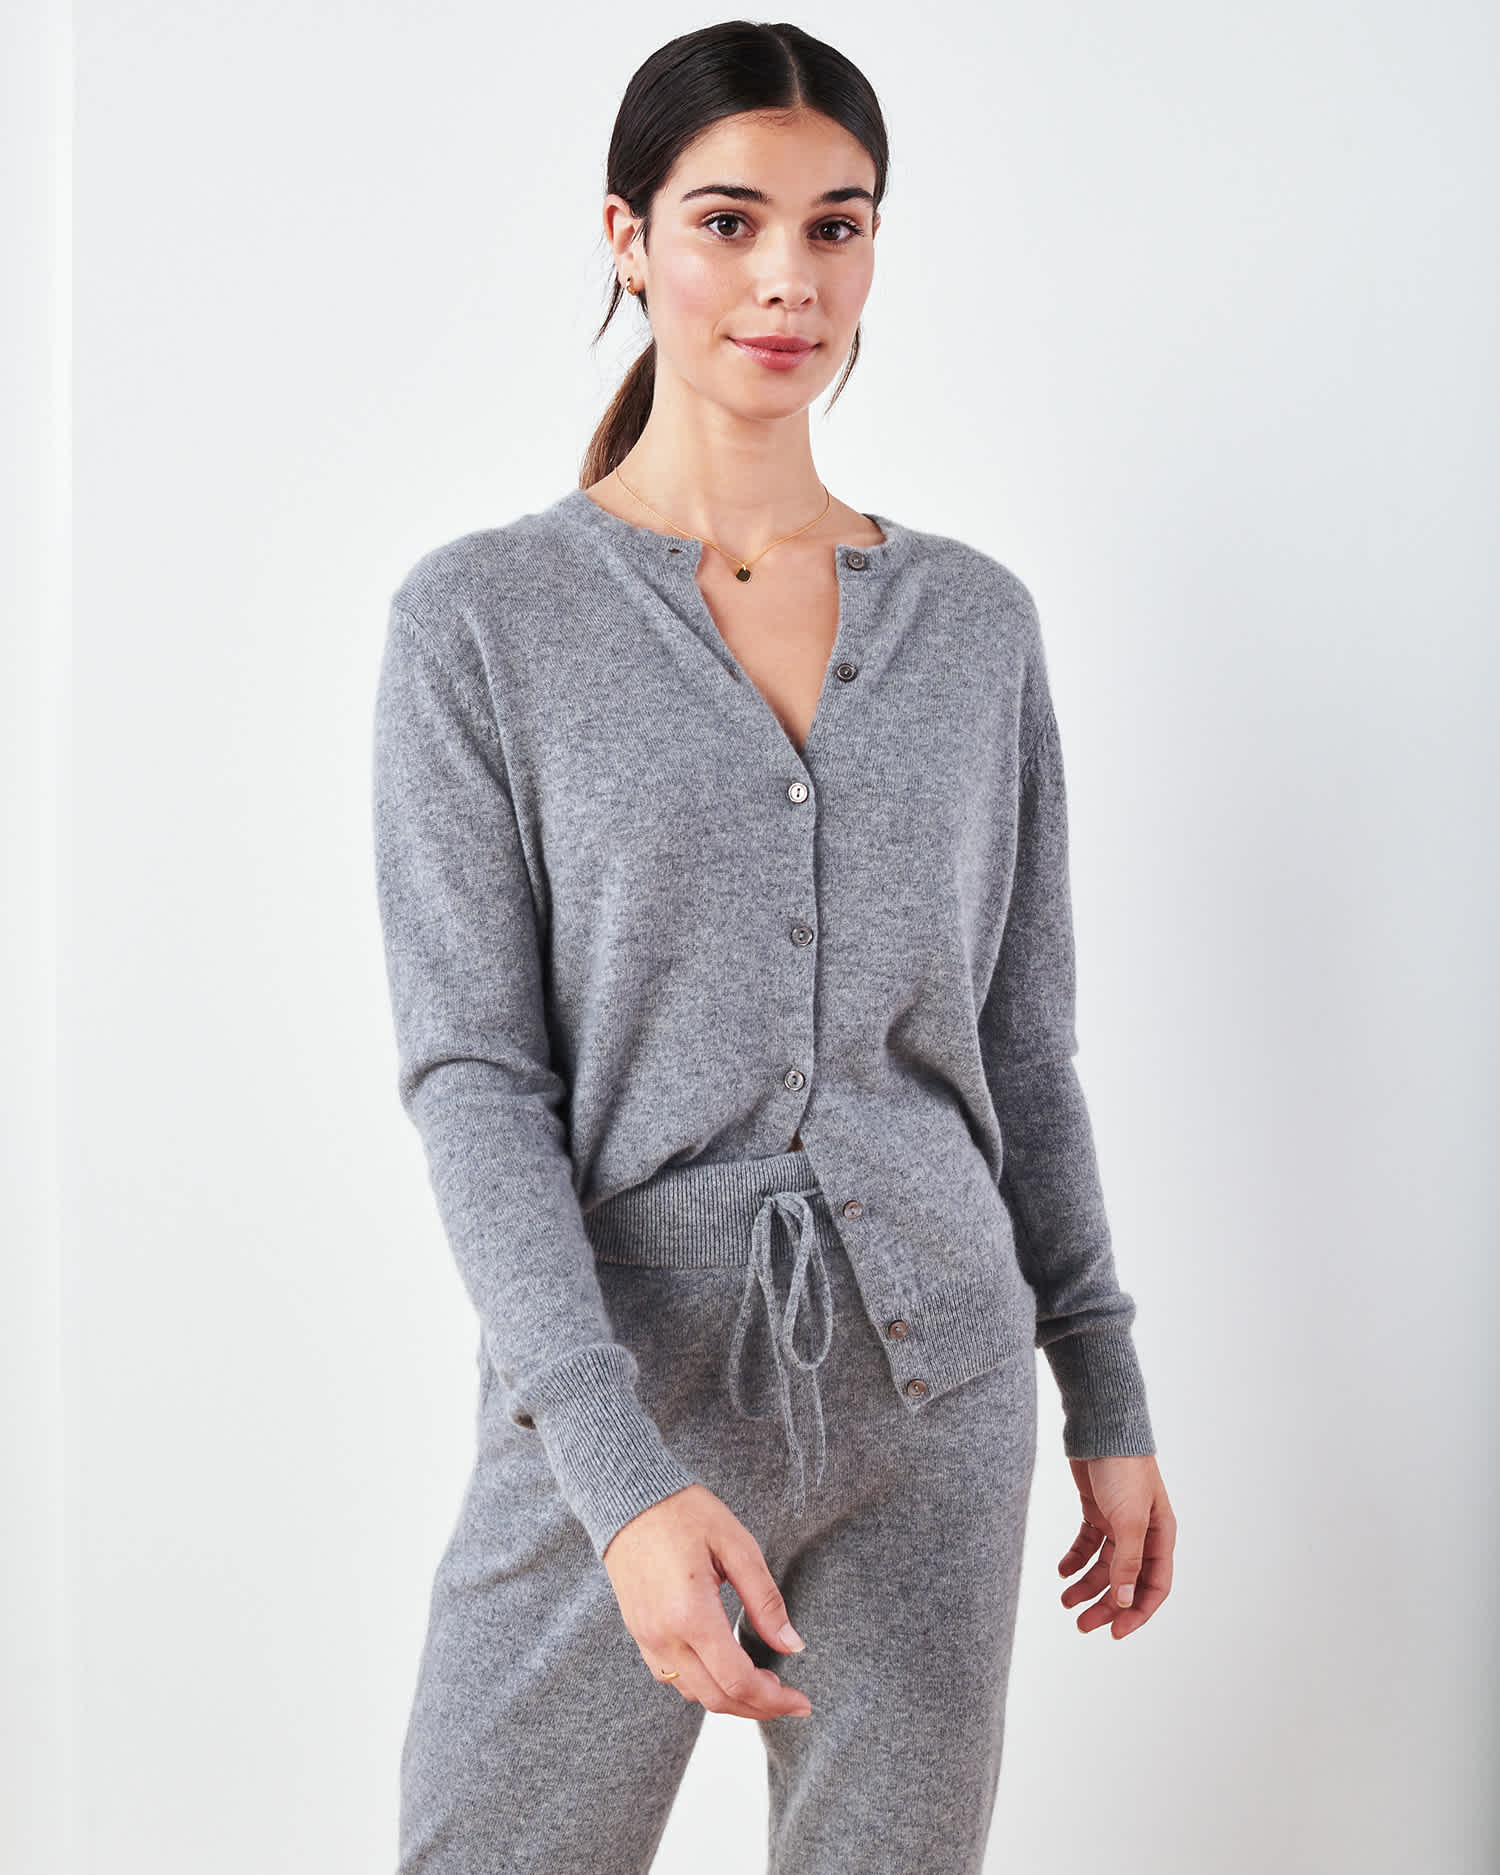 Woman wearing grey cashmere cardigan sweater and grey cashmere sweatpants standing